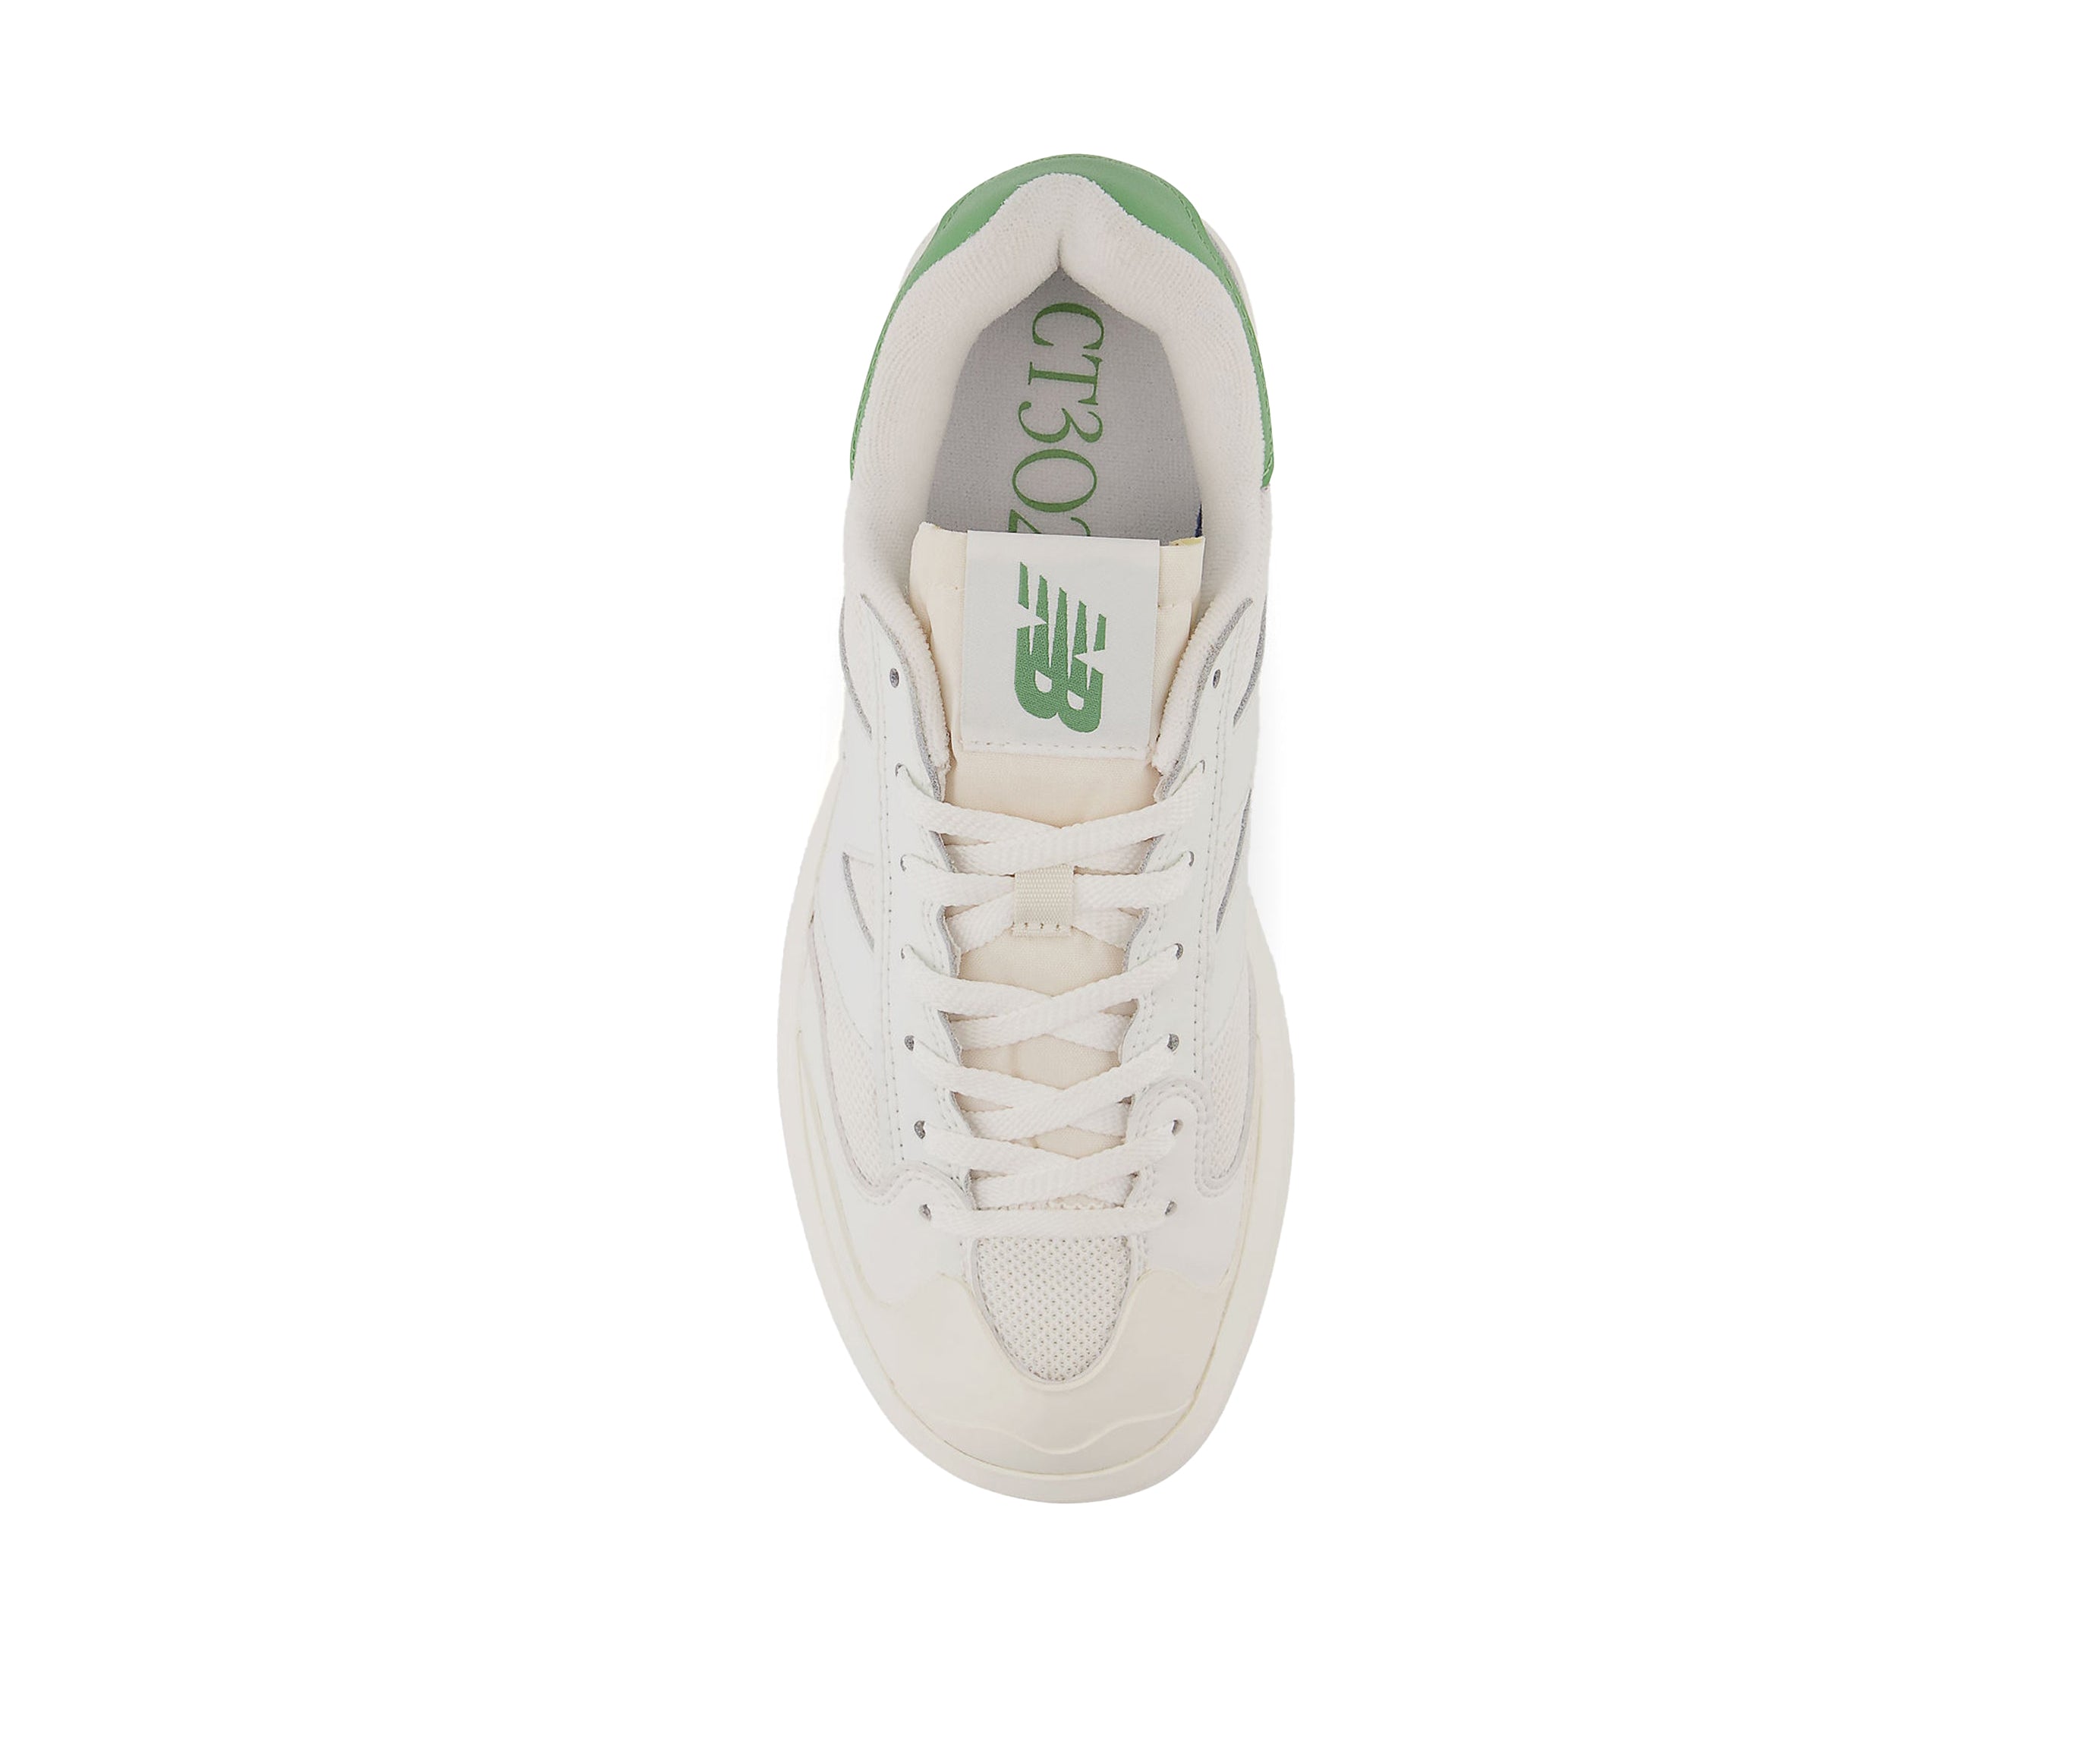 An off-white mixed canvas and leather platform sneaker with green accents from New Balance.